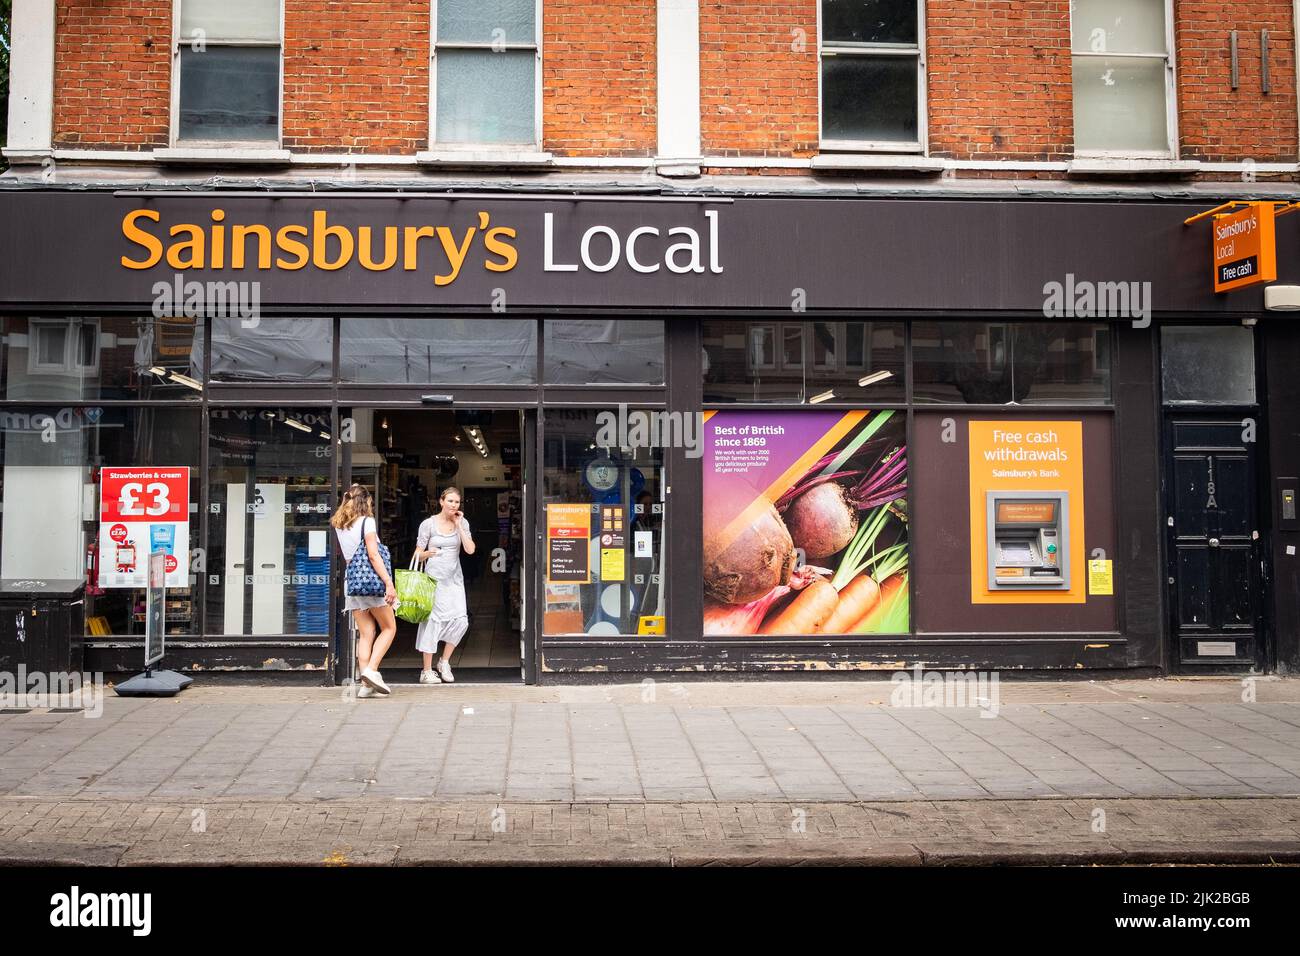 London- July, 2022: Sainsbury's Local branch in west London- large British supermarket brand Stock Photo